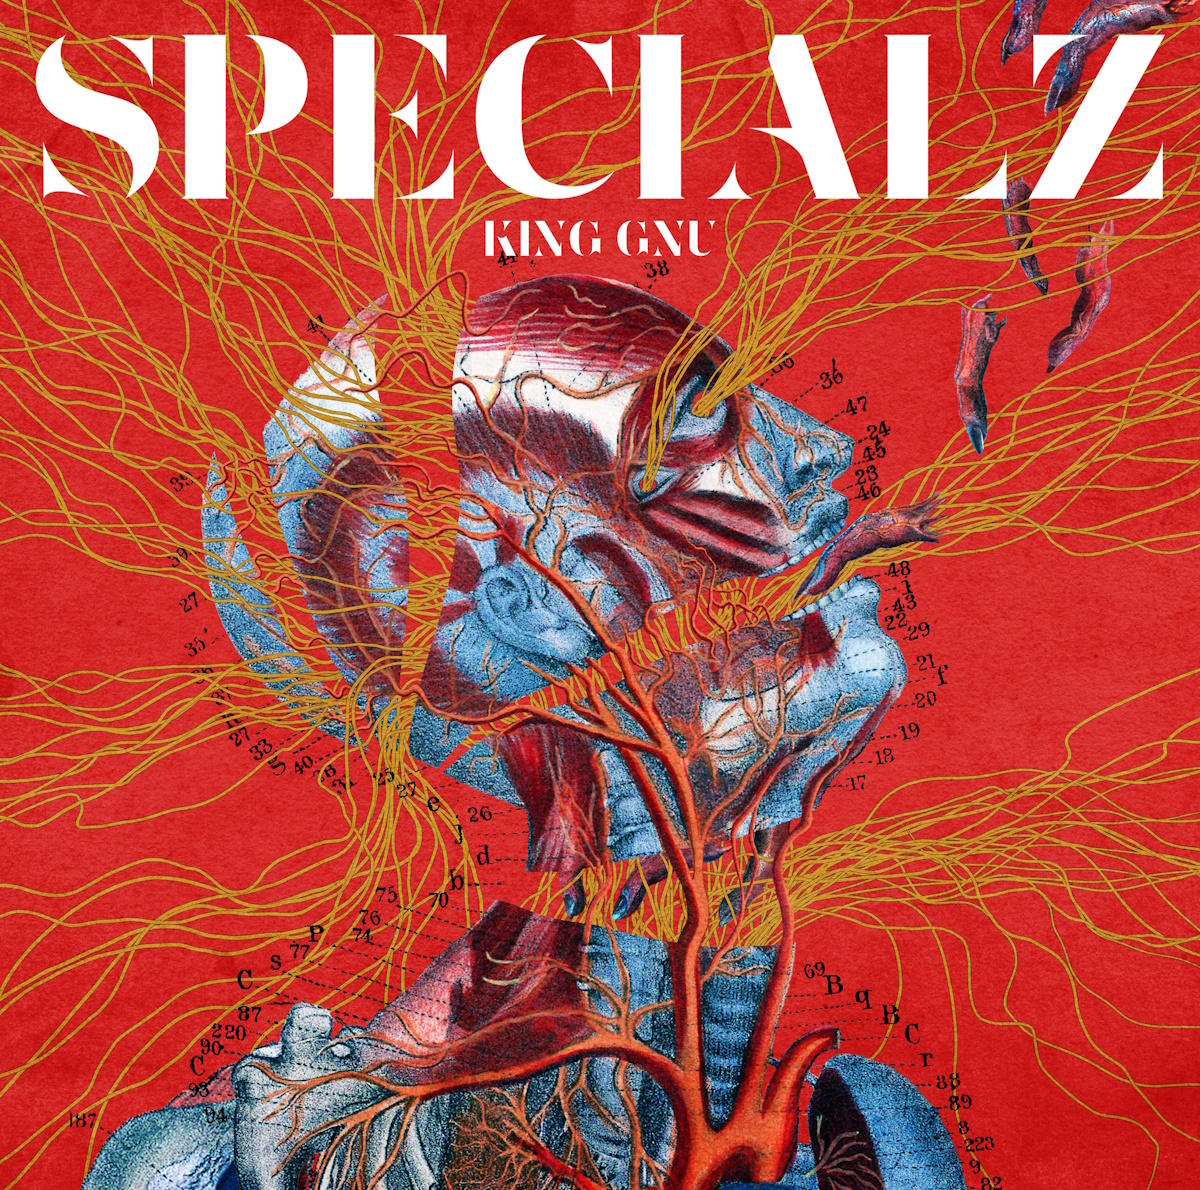 Cover art for『King Gnu - SPECIALZ』from the release『SPECIALZ』